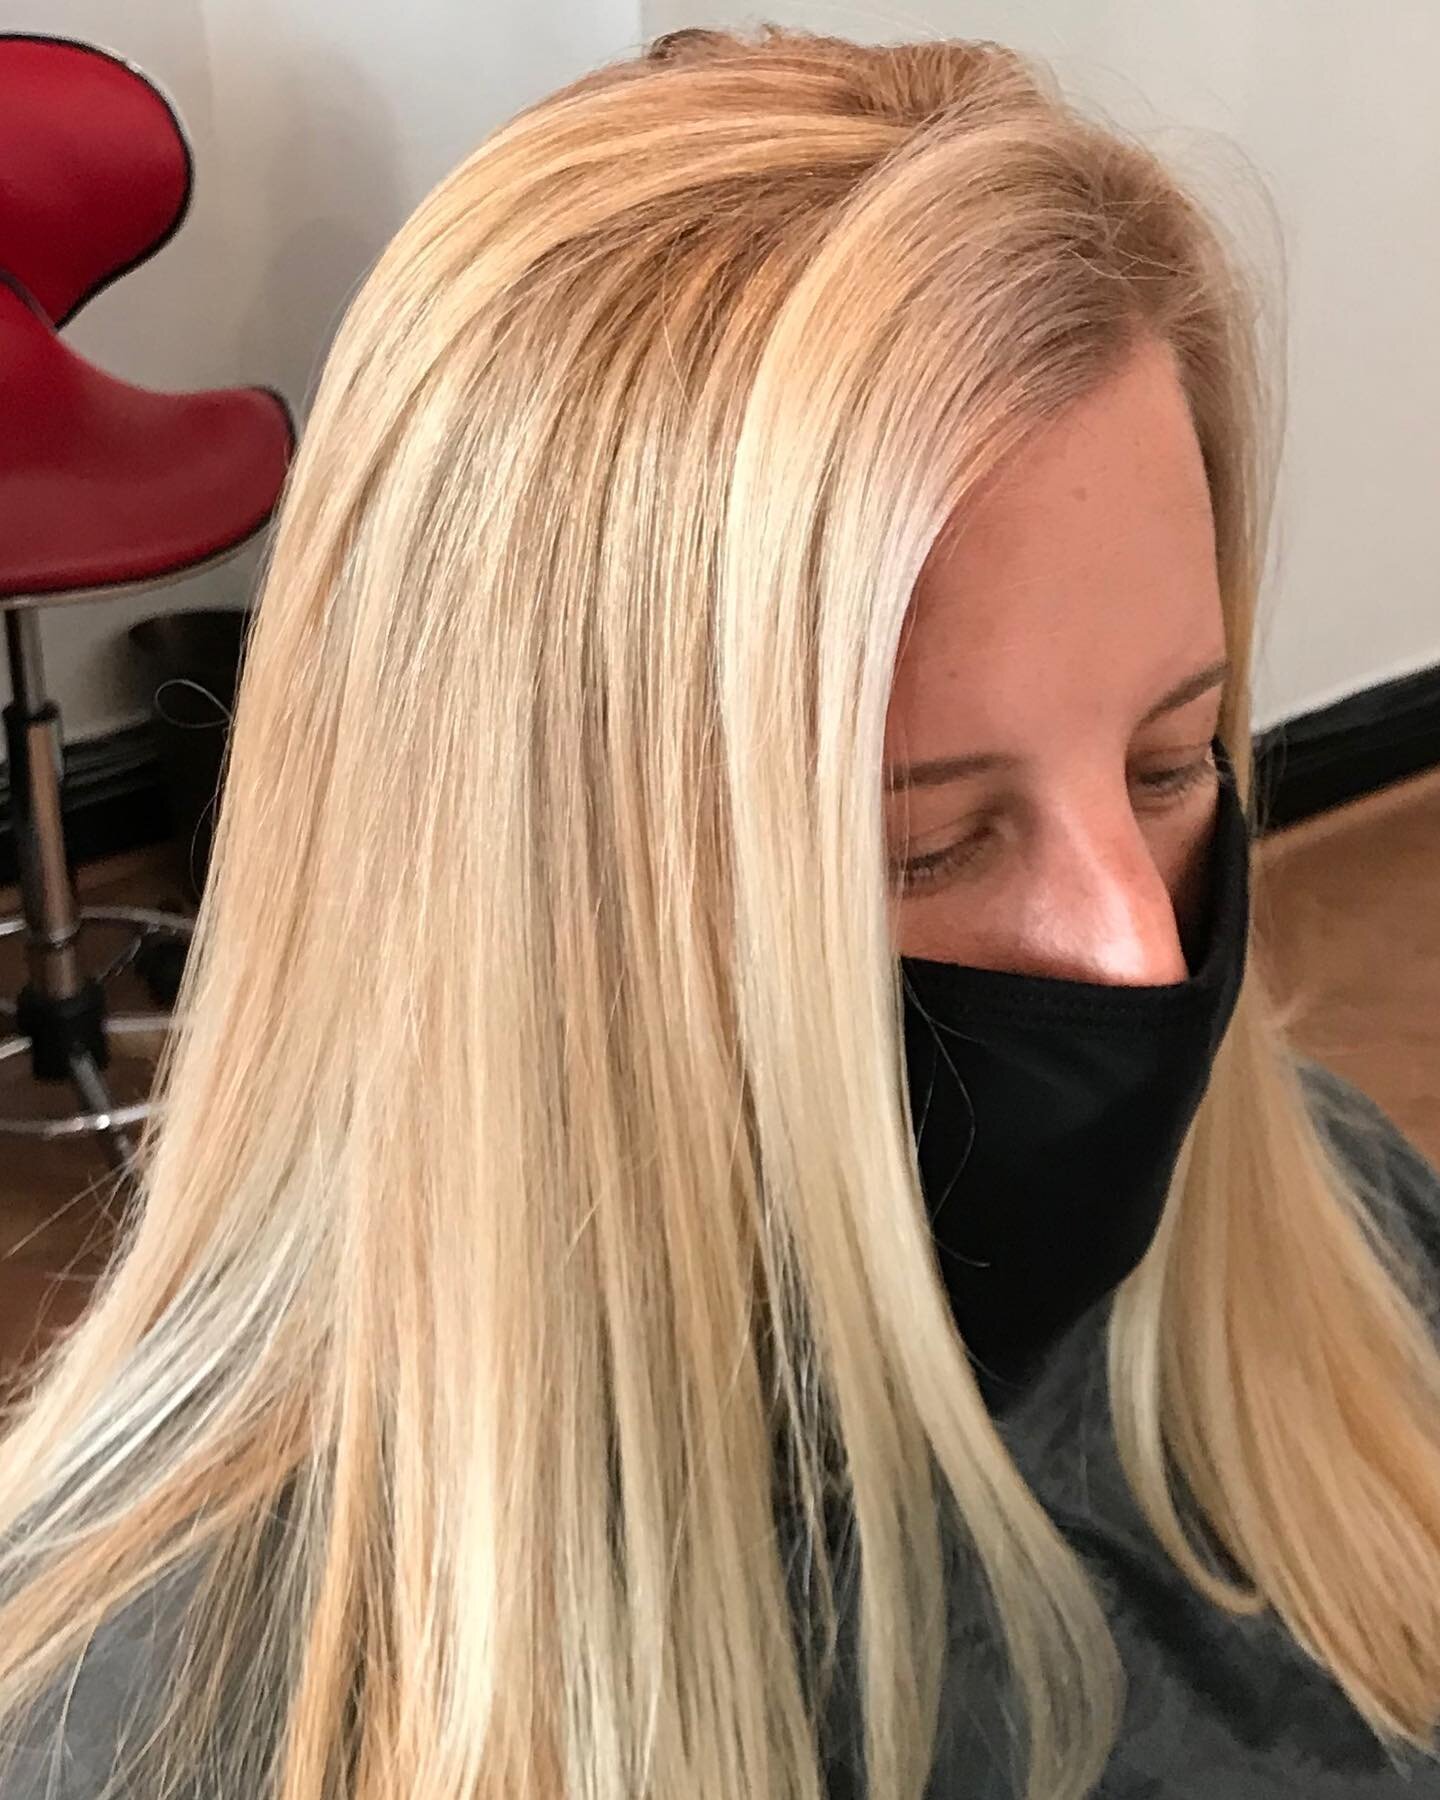 A creamy, luscious blonde balayage is a great way to end the week.
@essam_chalf 
.
.
.
.#balayage #wellaprofessional #wellacolor #illumina #dcstylist #georgetownmainstreet #georgetownhairstylist #hairbrained #geogetowndc #fringehairstudio